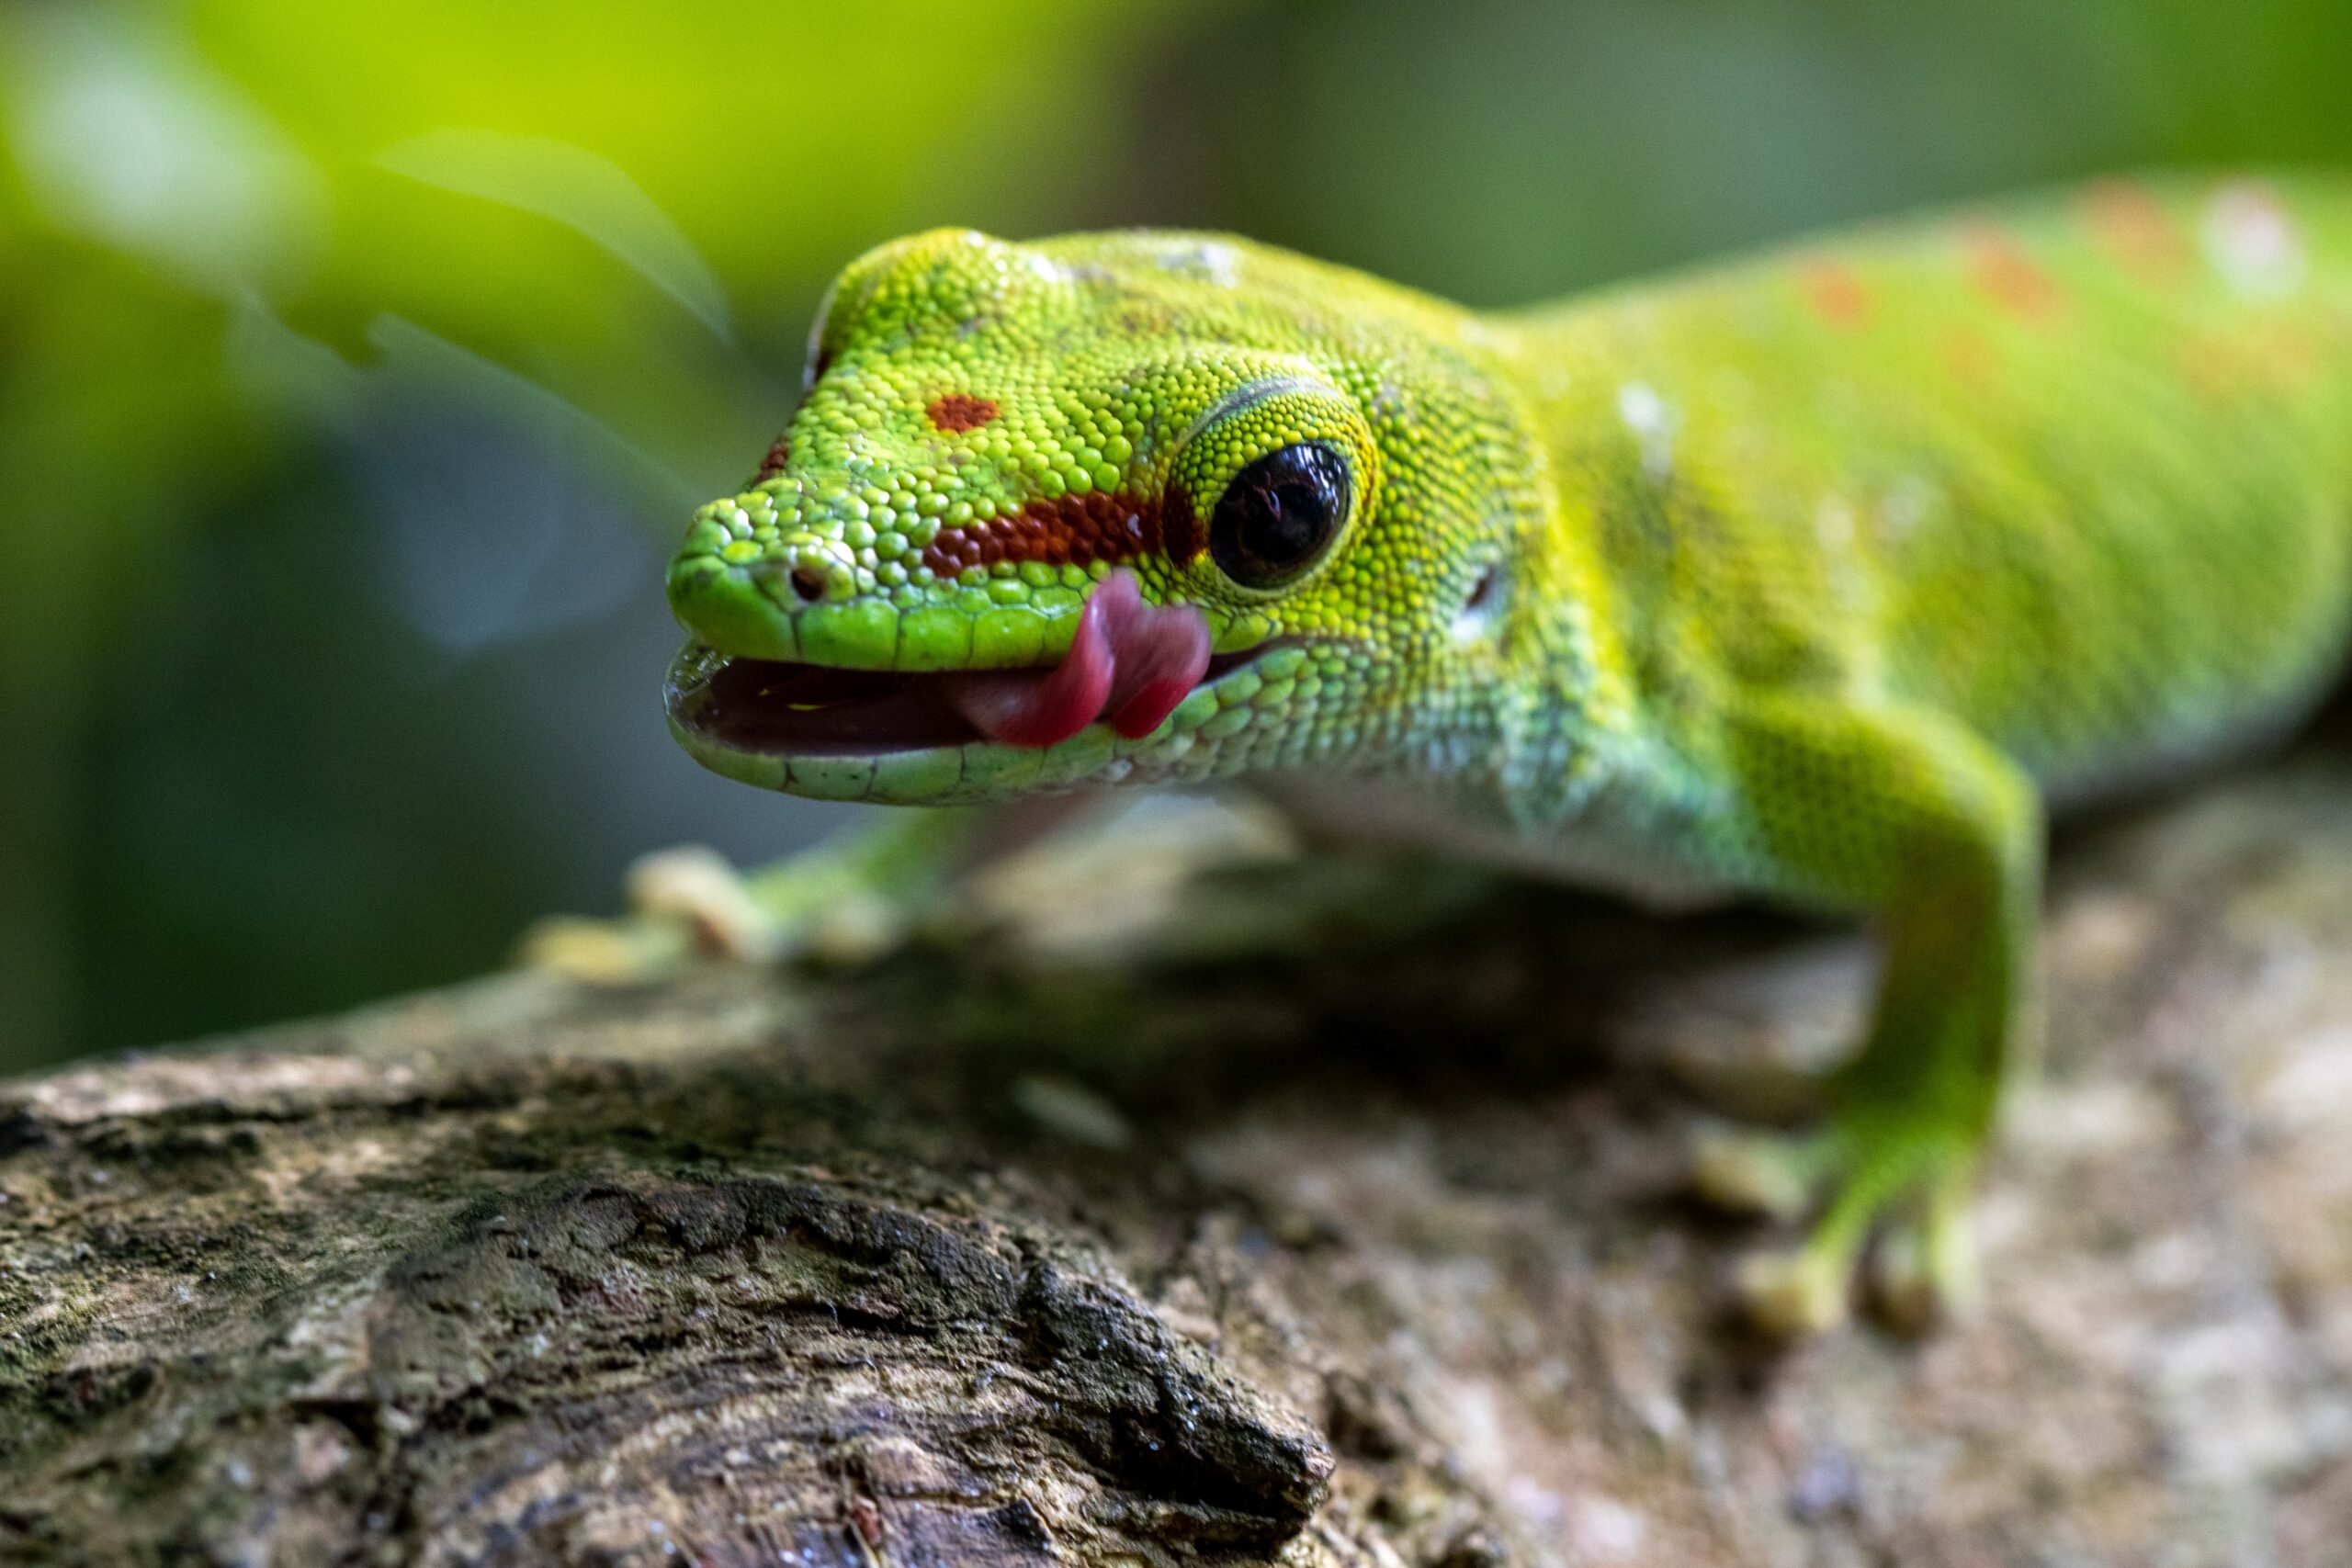 Can Giant Day Geckos Eat Honey? Find Out What They Like to Snack On